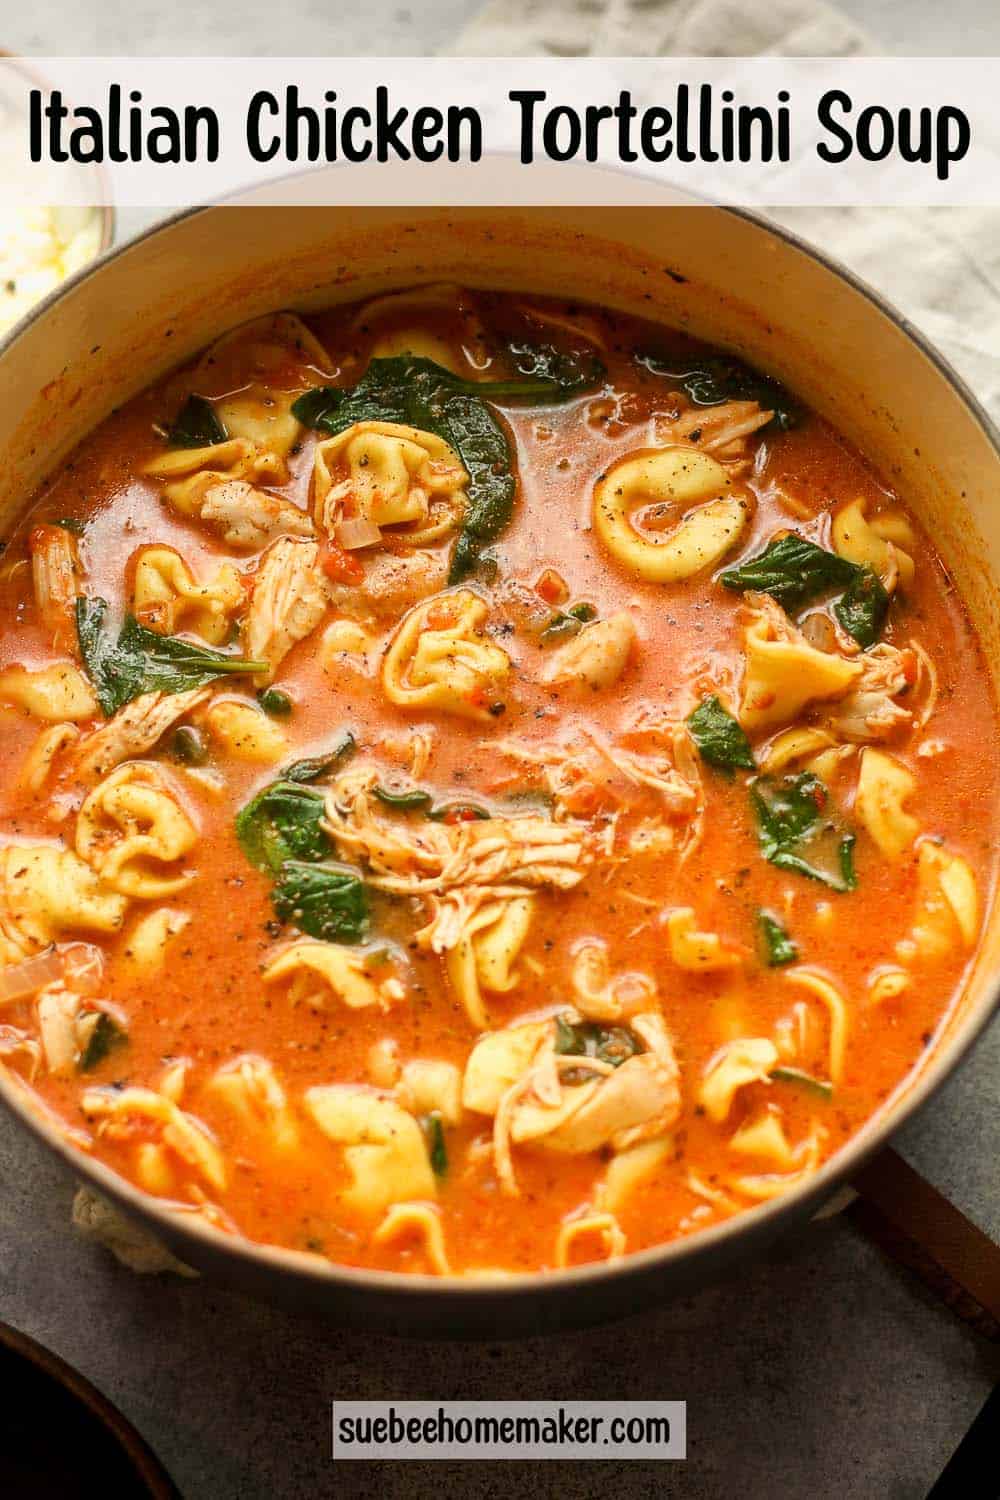 A pot of Italian Chicken Tortellini Soup with spinach.